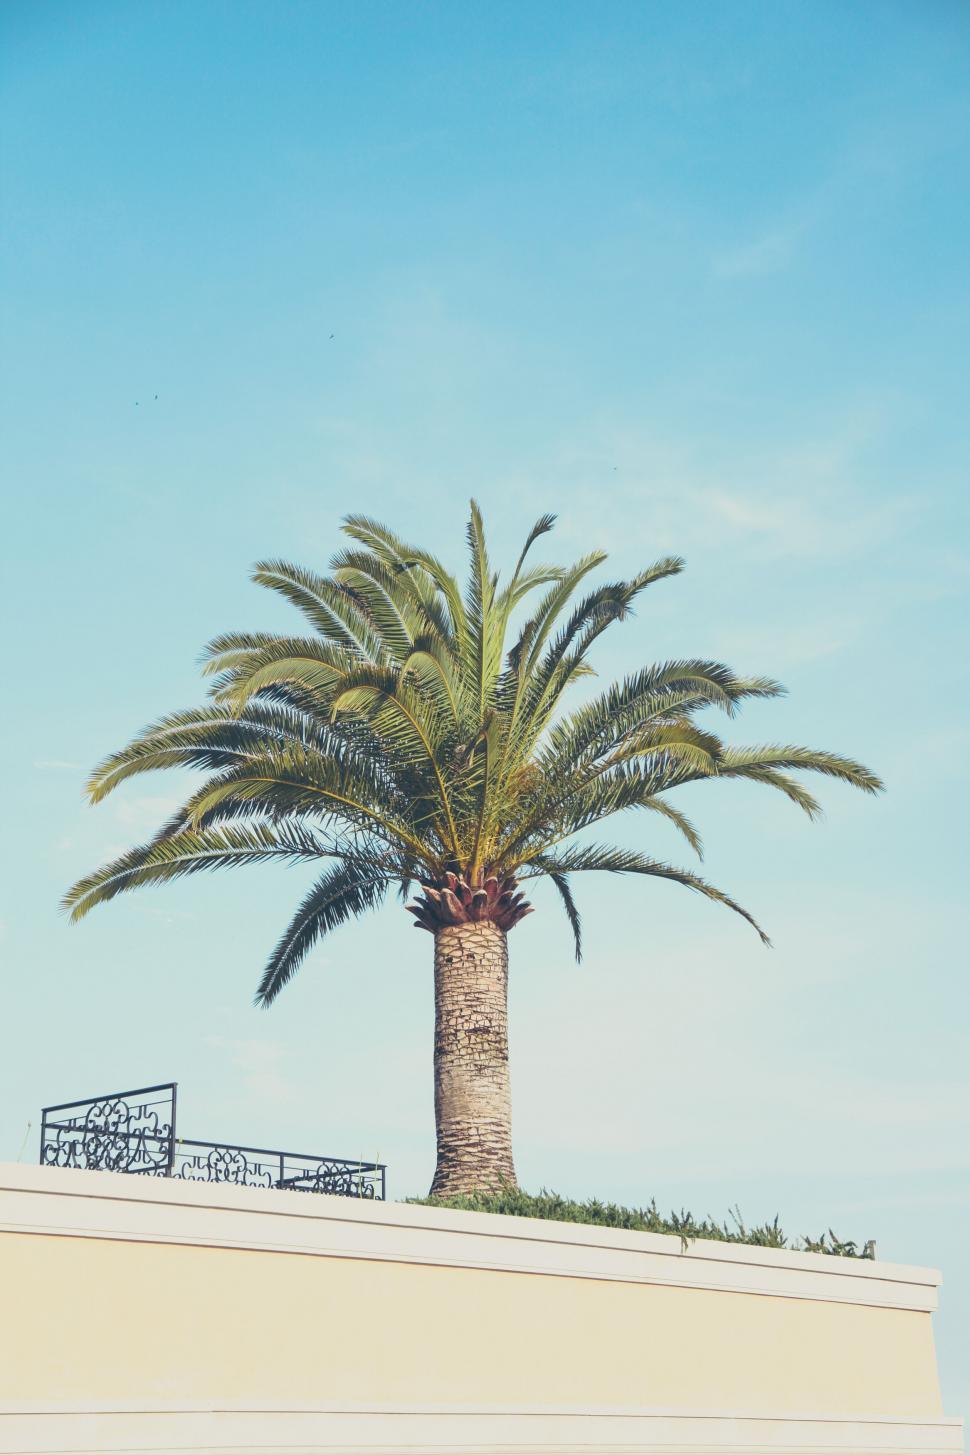 Free Image of A palm tree on a sunny day 